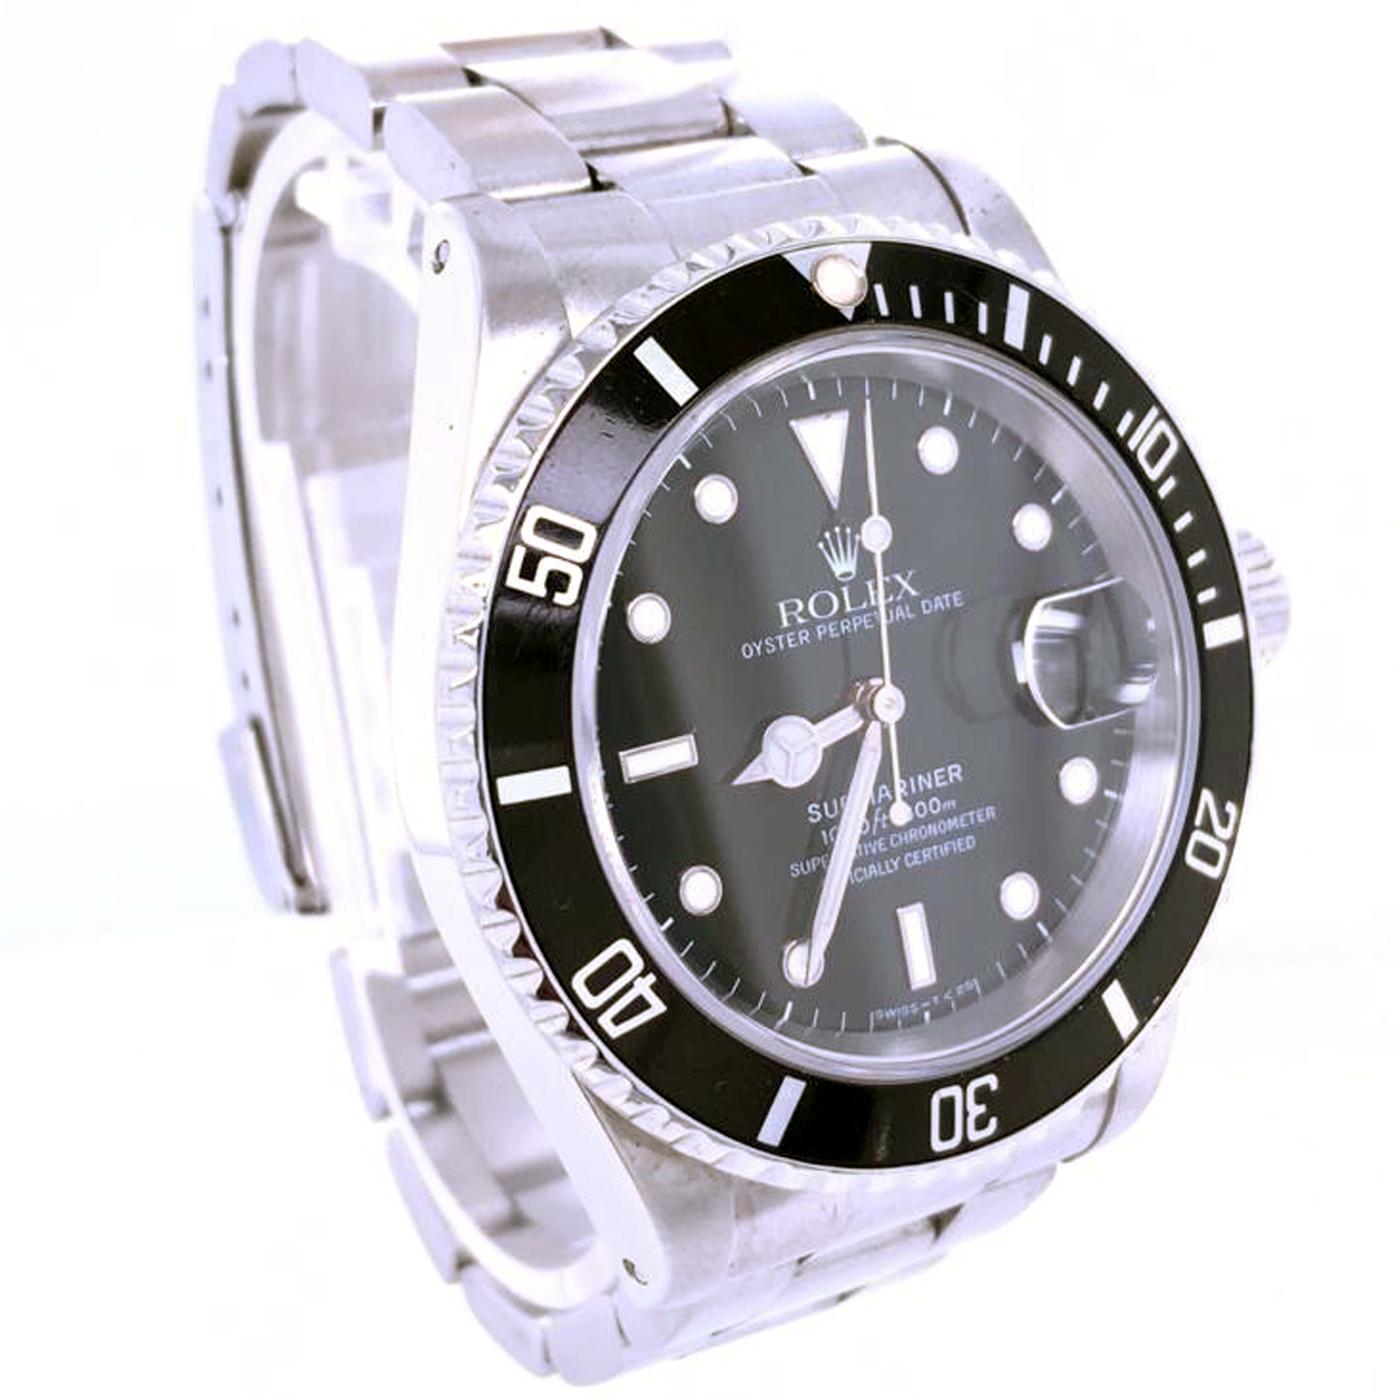 Rolex Submariner Date 40mm Black Dial Stainless Steel Oyster Watch 16610 In Excellent Condition For Sale In Aventura, FL